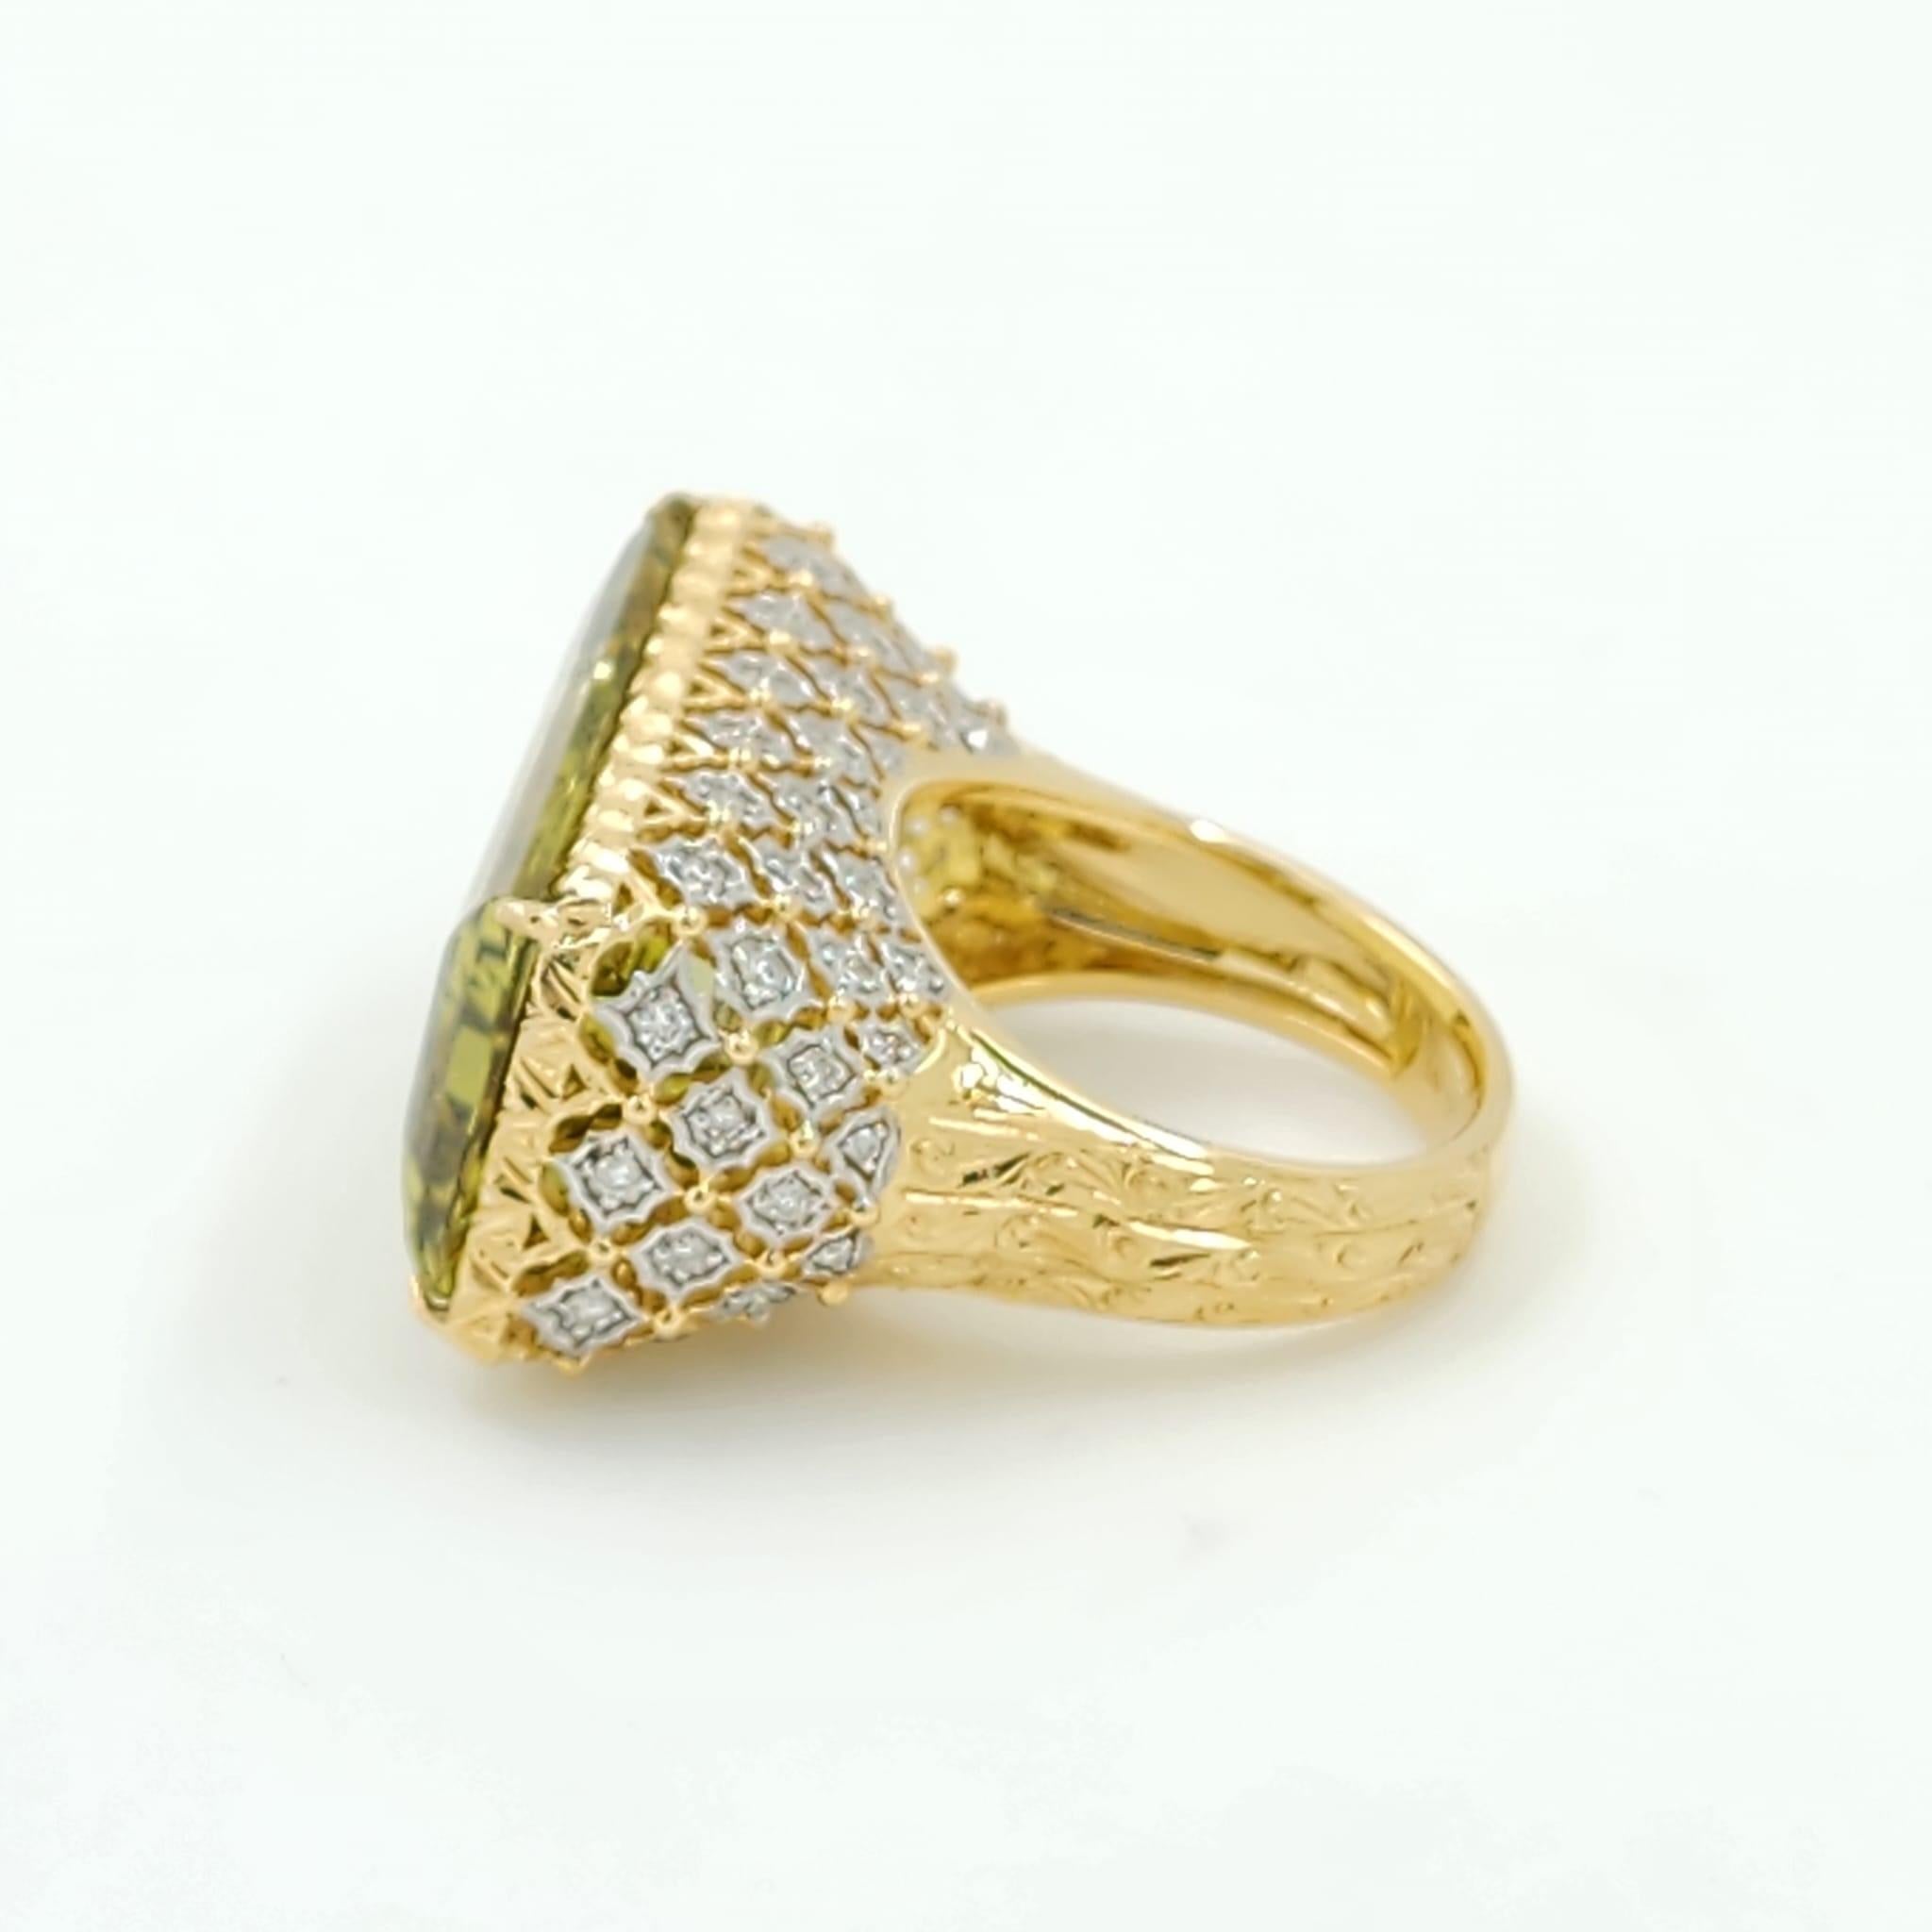 Baguette Cut GIA Certified 25.58 Carat Golden Beryl and Diamond Ring in 18K Yellow Gold For Sale